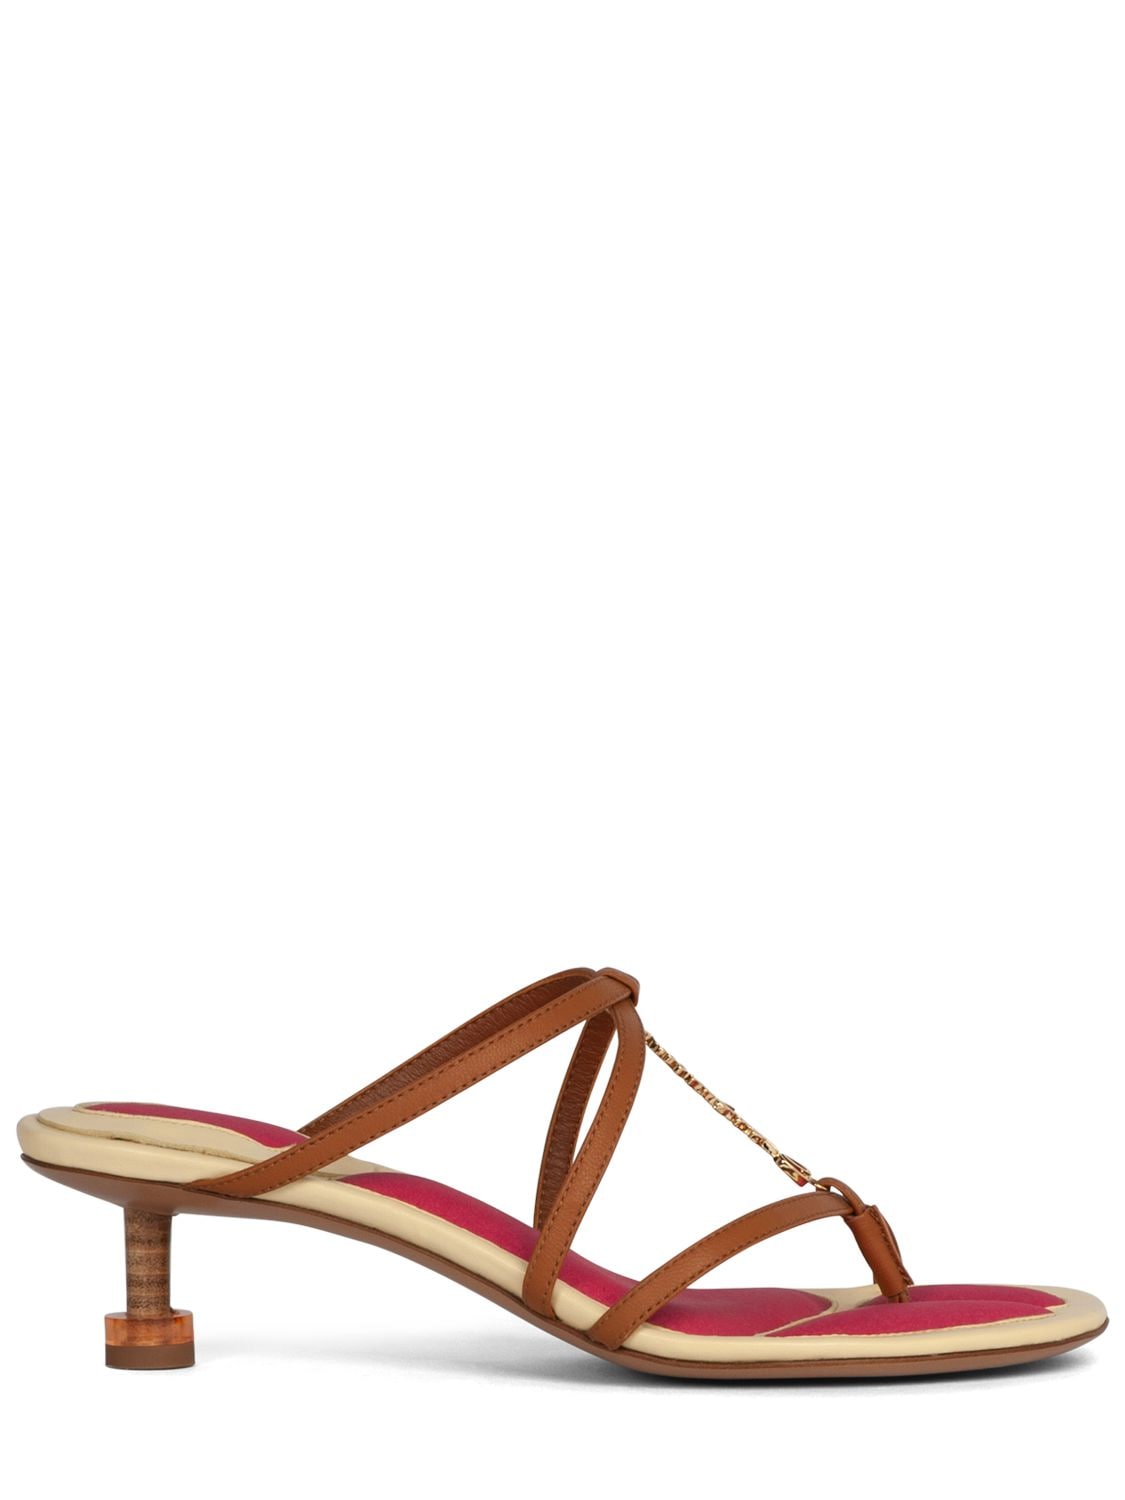 Jacquemus Leather Sculptural Sandals With Metal Signature In Tan | ModeSens